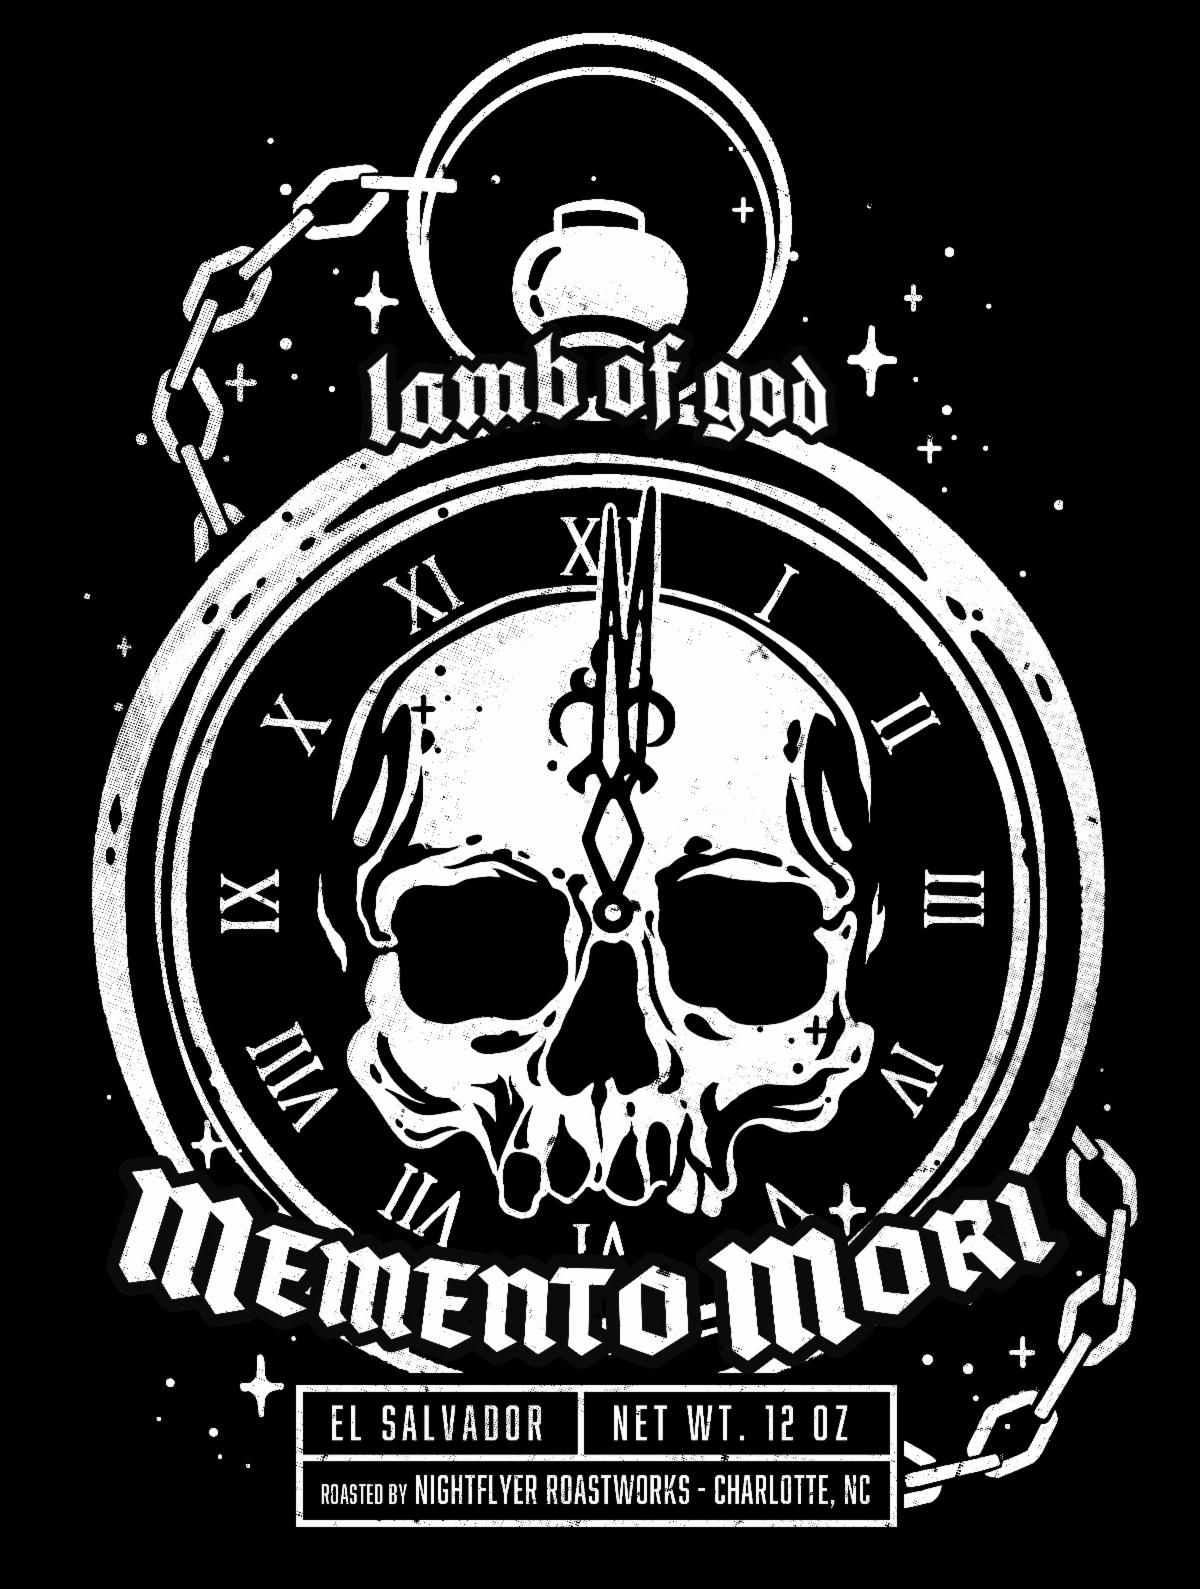 LAMB OF GOD Announces Collaboration with Nightflyer Roastworks for Memento Mori Coffee